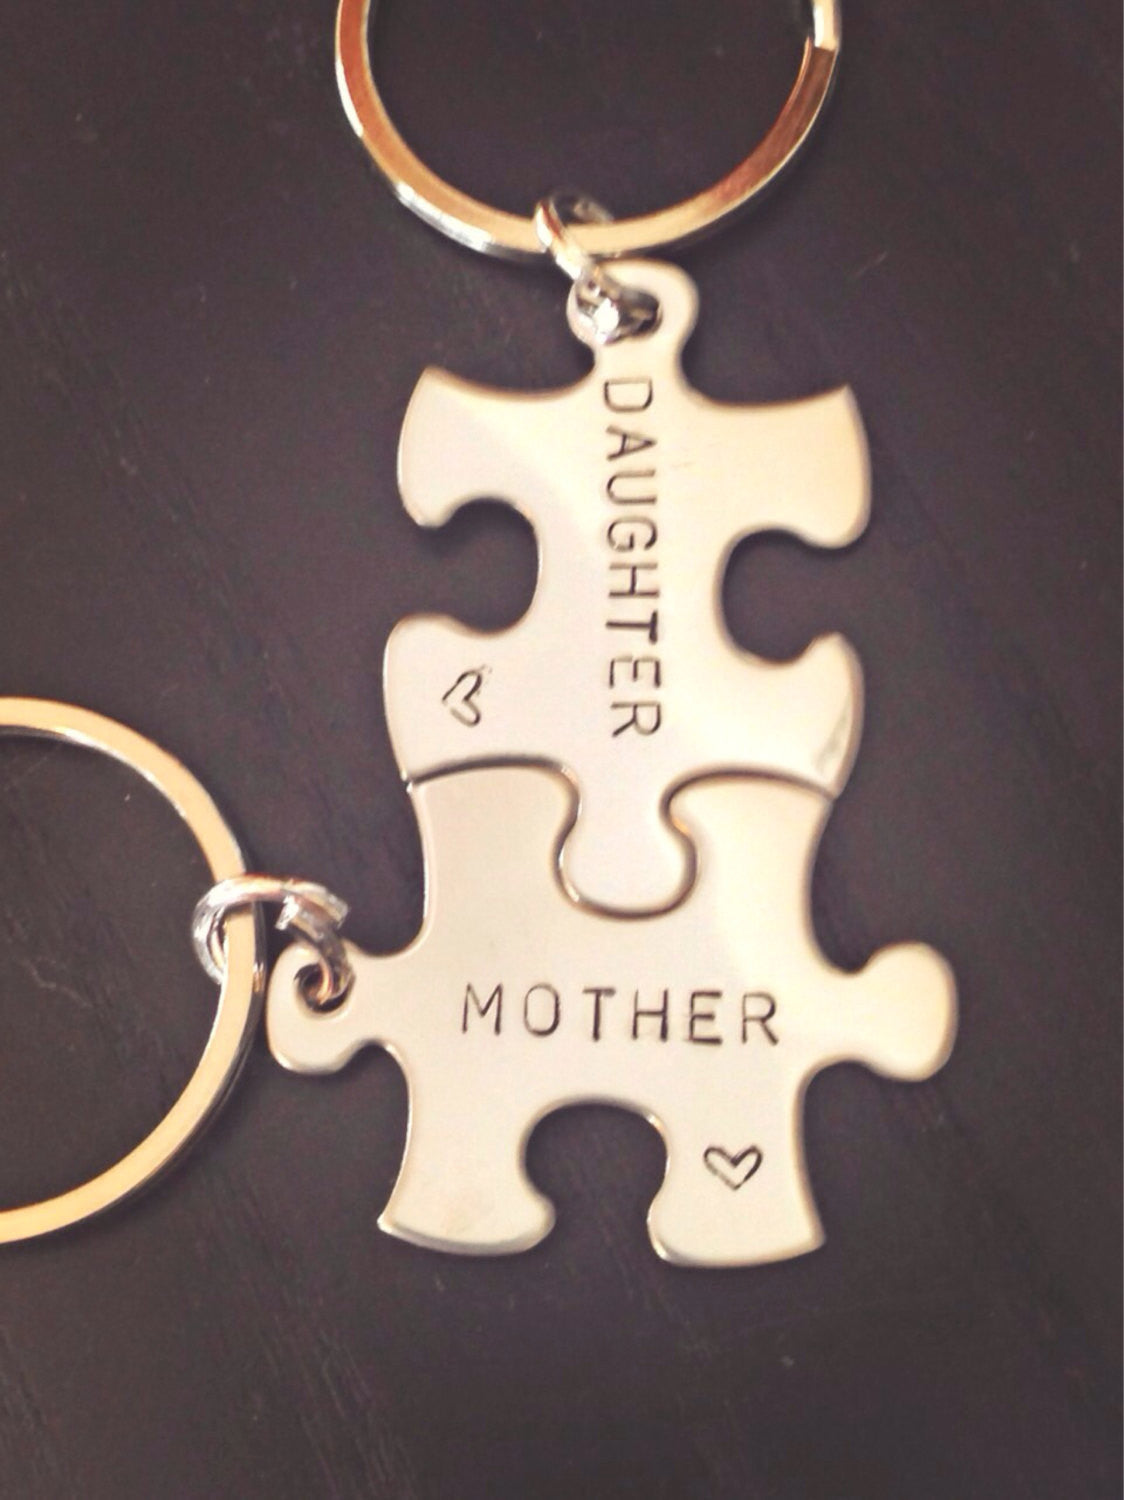 Mother Daughter Gifts-, Mother Daughter Keychain-, Valentine Mother Daughter, Mother's Day Gift -, Personalized Keychains-, natashaaloha - Natashaaloha, jewelry, bracelets, necklace, keychains, fishing lures, gifts for men, charms, personalized, 